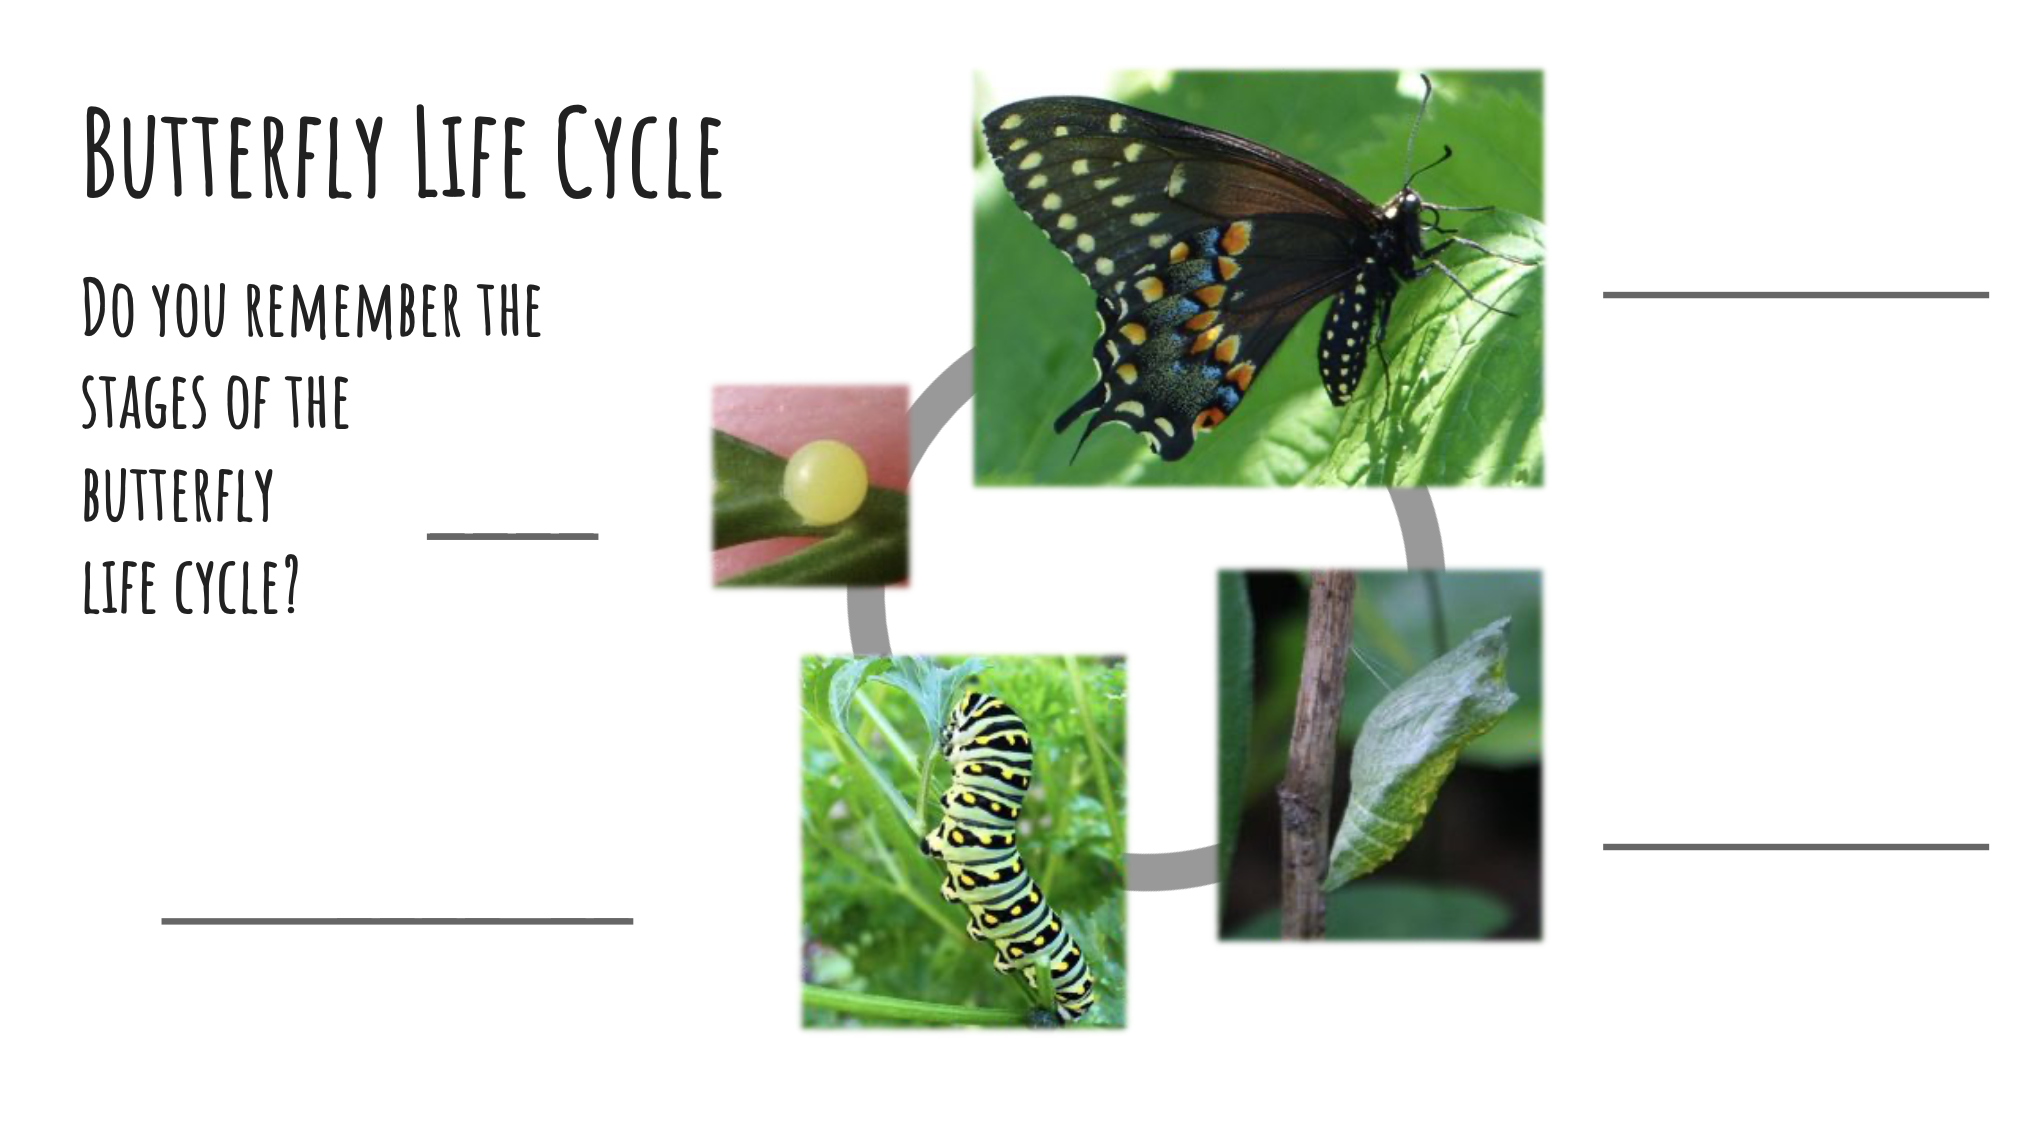 Do you rem ember the stages of the butterfly life cycle?